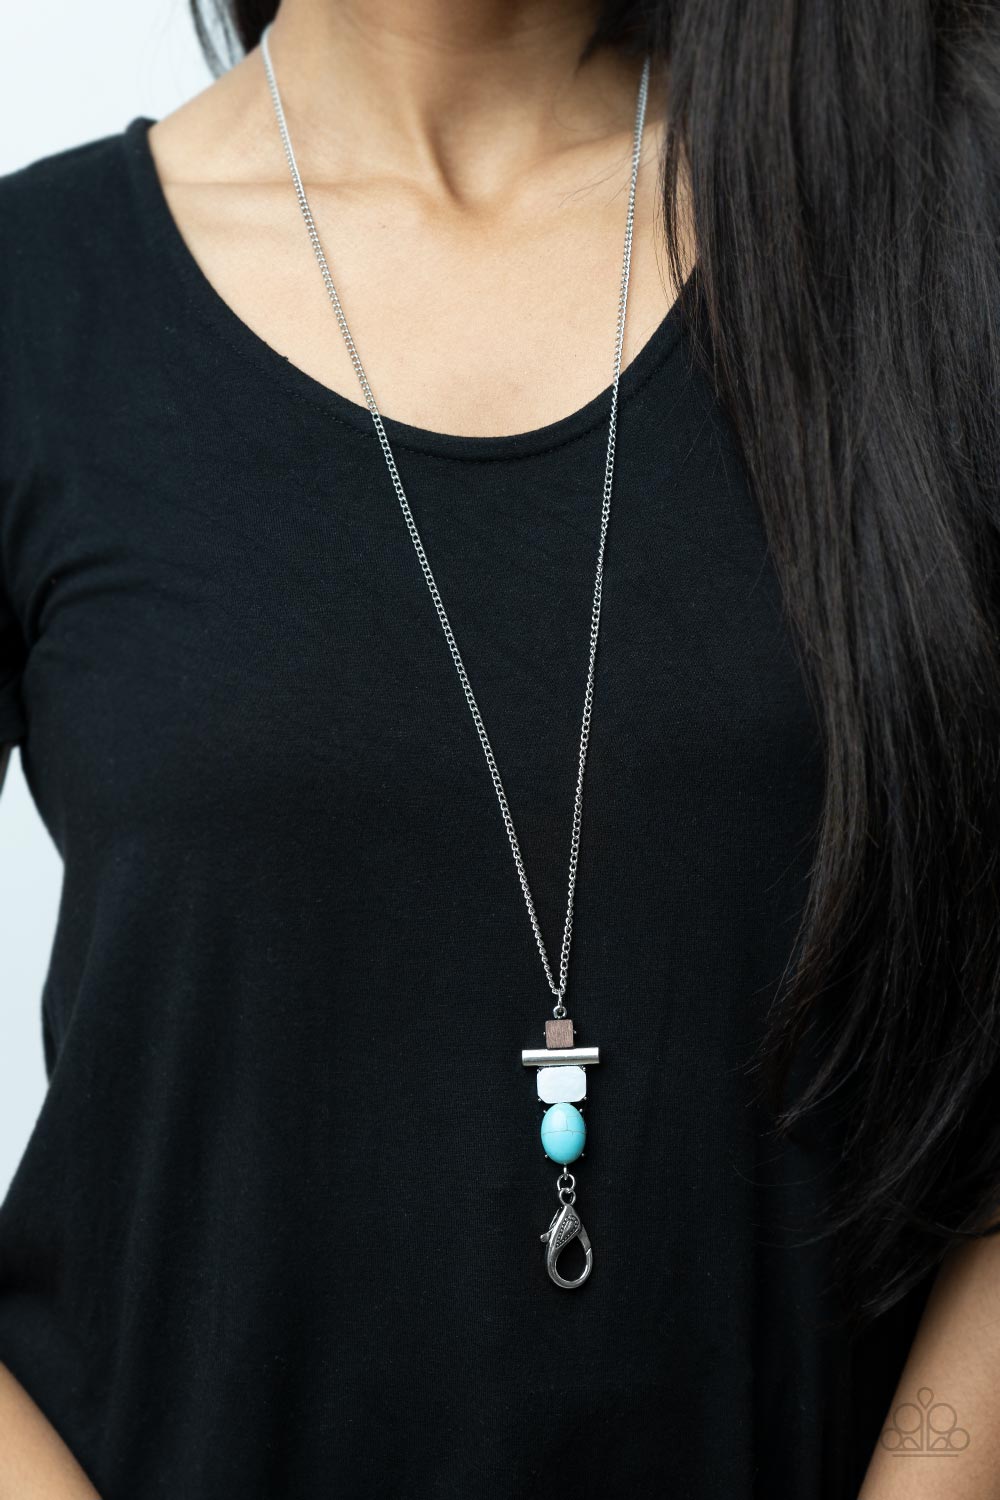 Natural Novice Turquoise Blue Stone and Wood Lanyard Necklace - Paparazzi Accessories- model - CarasShop.com - $5 Jewelry by Cara Jewels